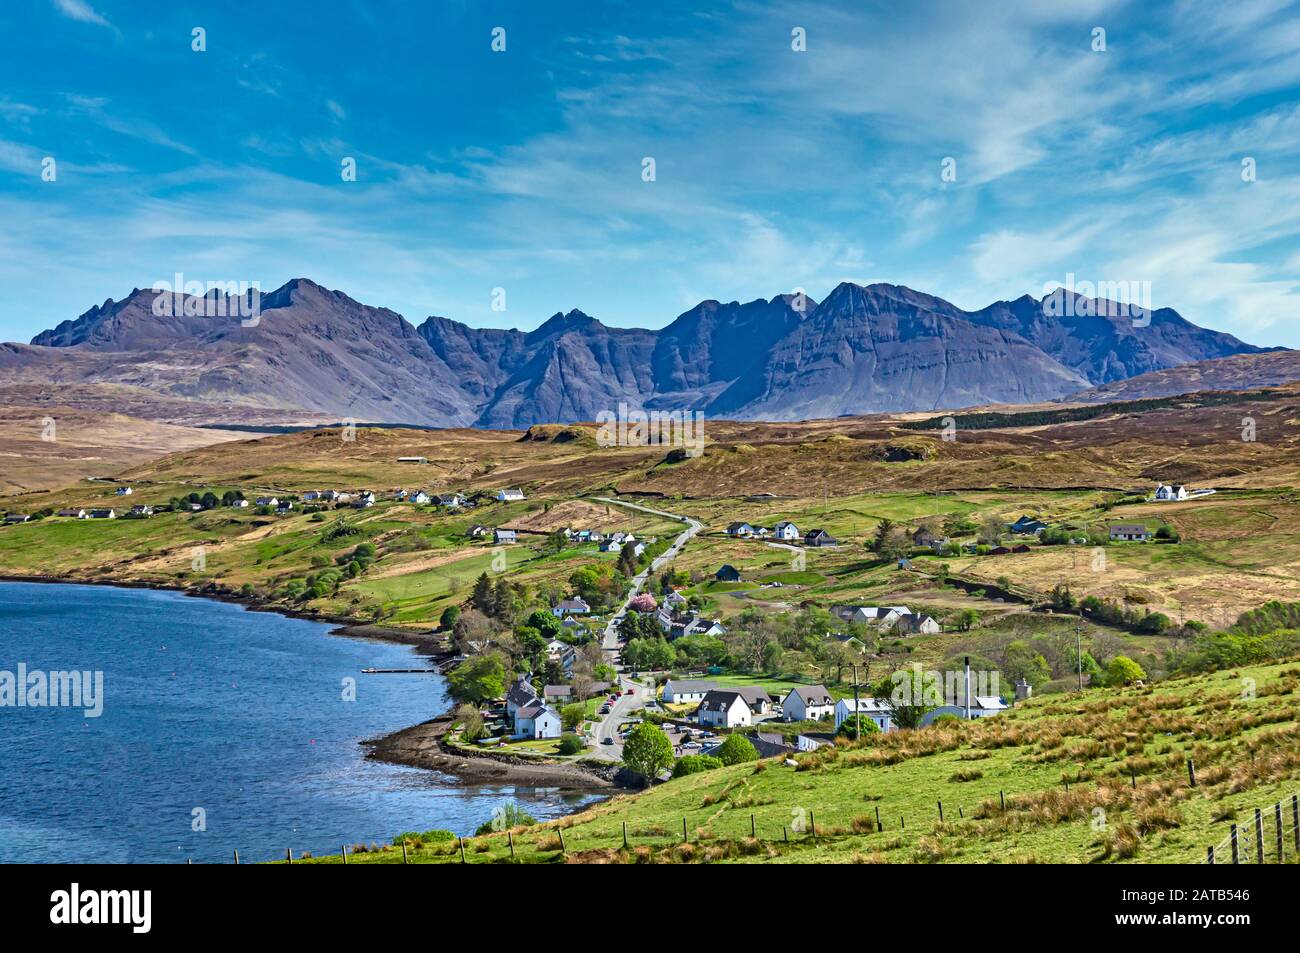 The Cuillin Hills on the Isle of Skye Inner Hebrides Highland Scotland seen from above Carbost village on Loch Harport Stock Photo